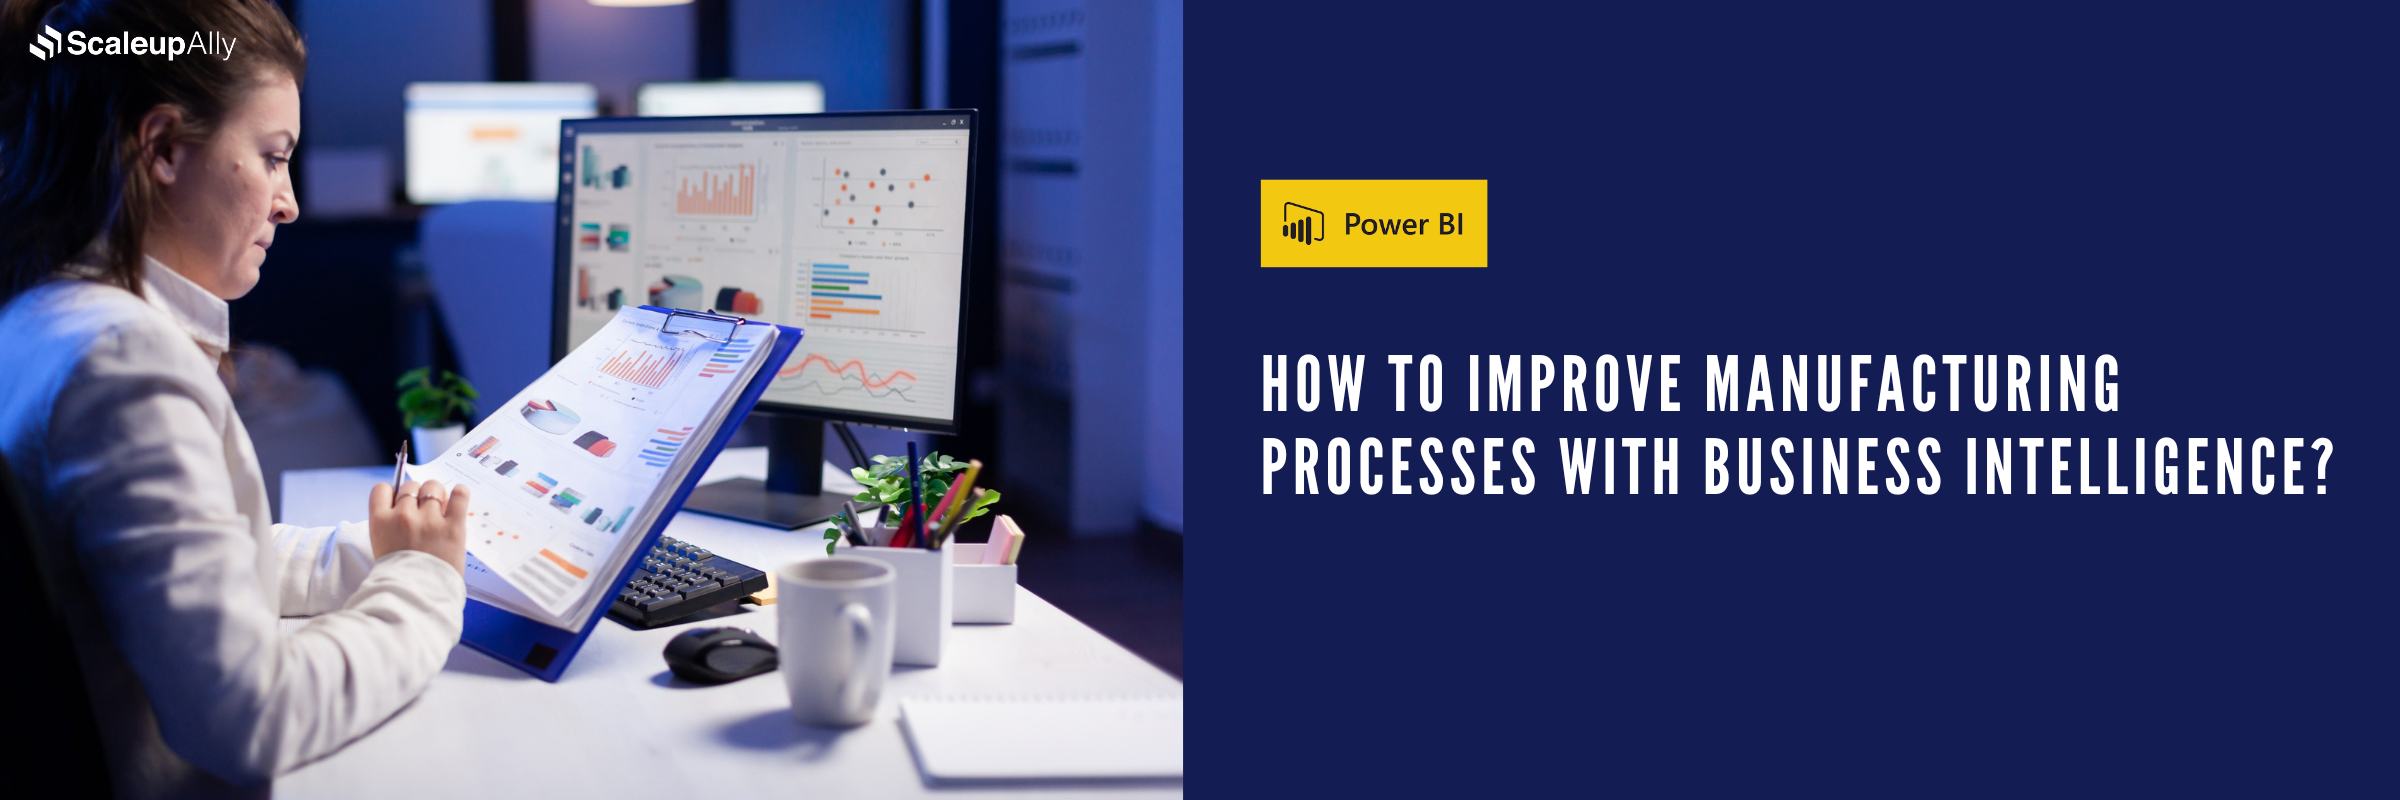 How to Improve Manufacturing Processes with Business Intelligence?